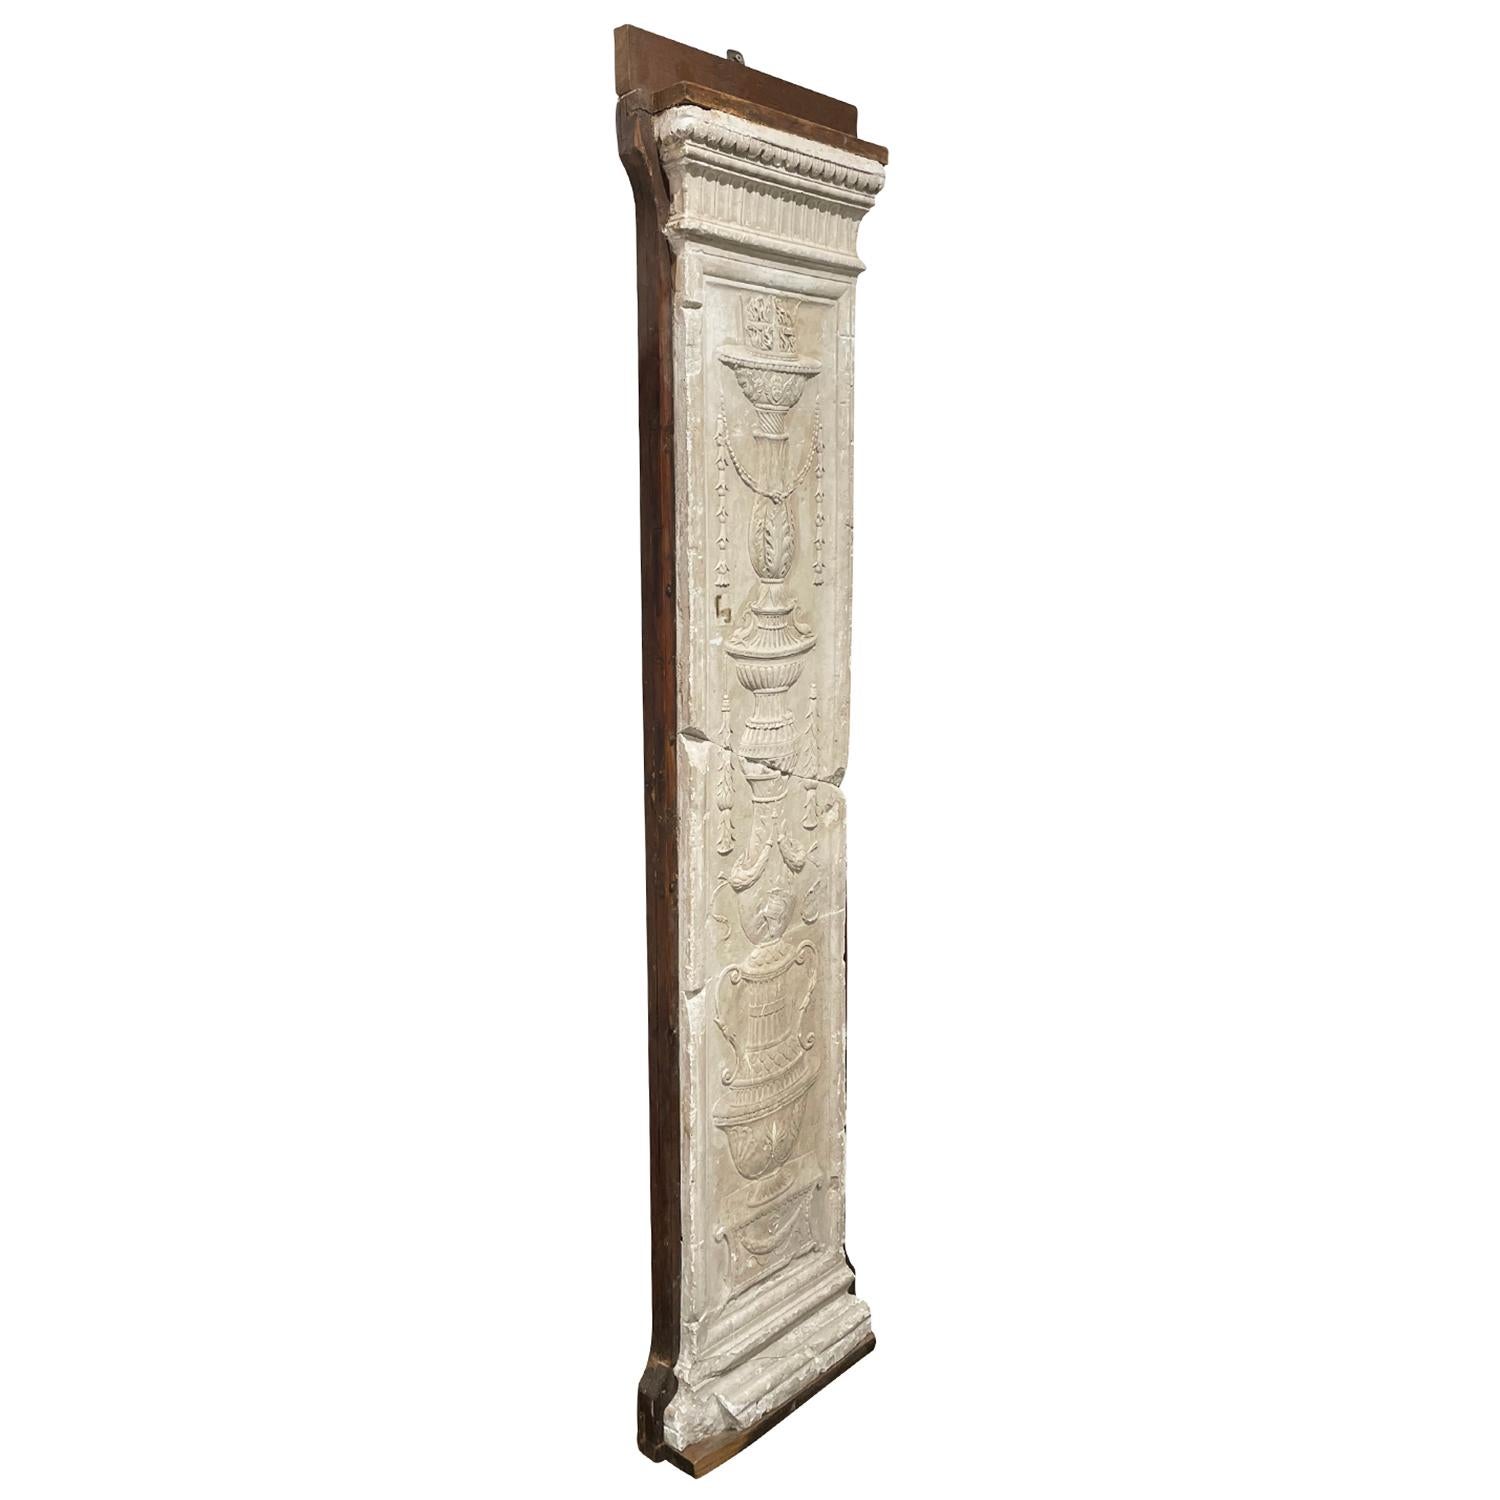 A white, antique French Neoclassical style pilaster made of hand crafted plaster mounted on Walnut board, in good condition. The detailed wall, bas relief represents the Neoclassicism and Classicism time period, era. Wear consistent with age and